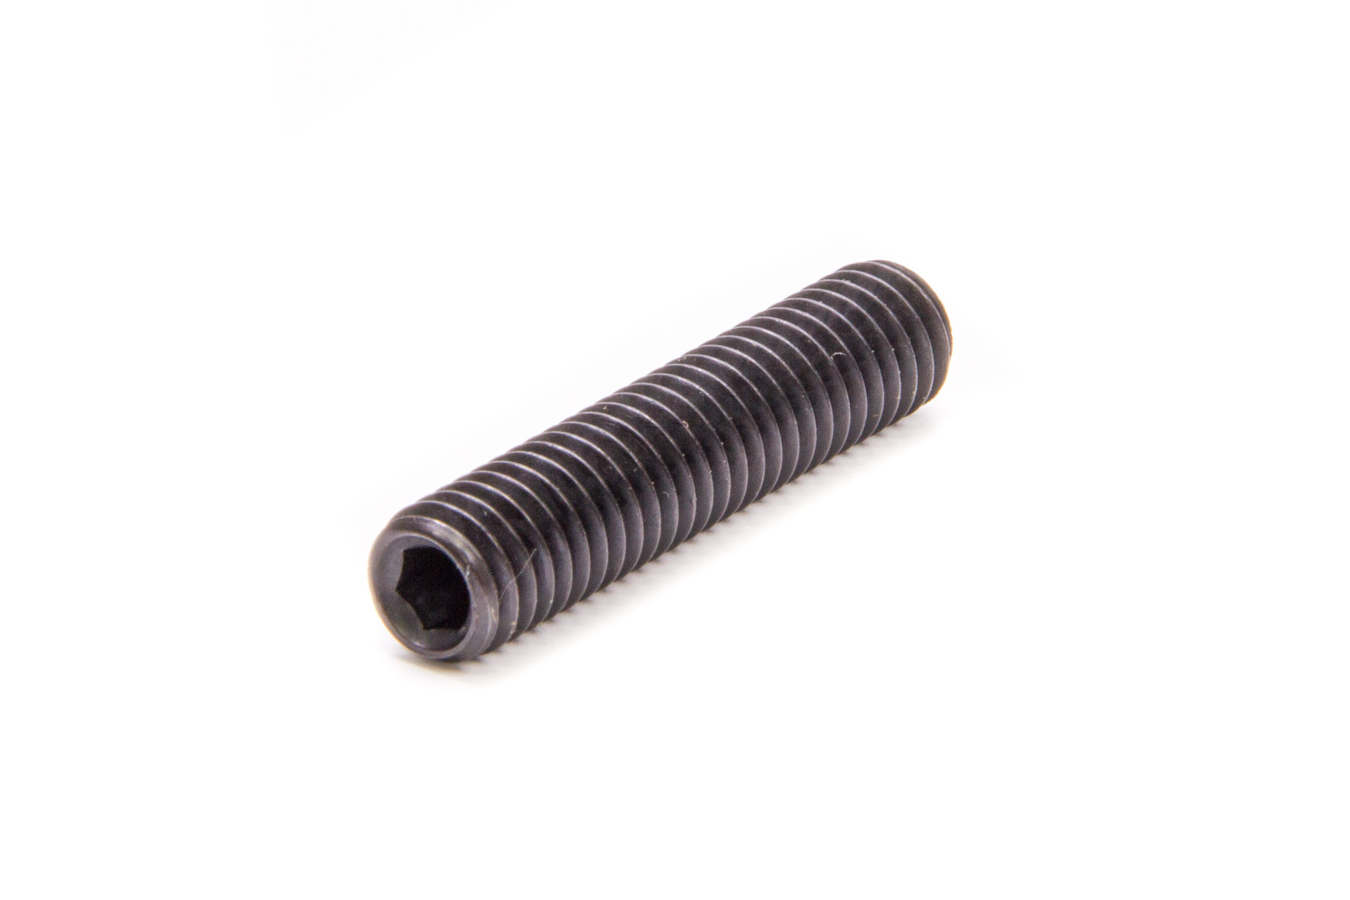 Diversified Machine RRC-1355 Gear Cover Stud, 3/8-16 in Thread, 1-3/4 in Long, Steel, Black Oxide, CT-1, Bulldog Quick Change, Each